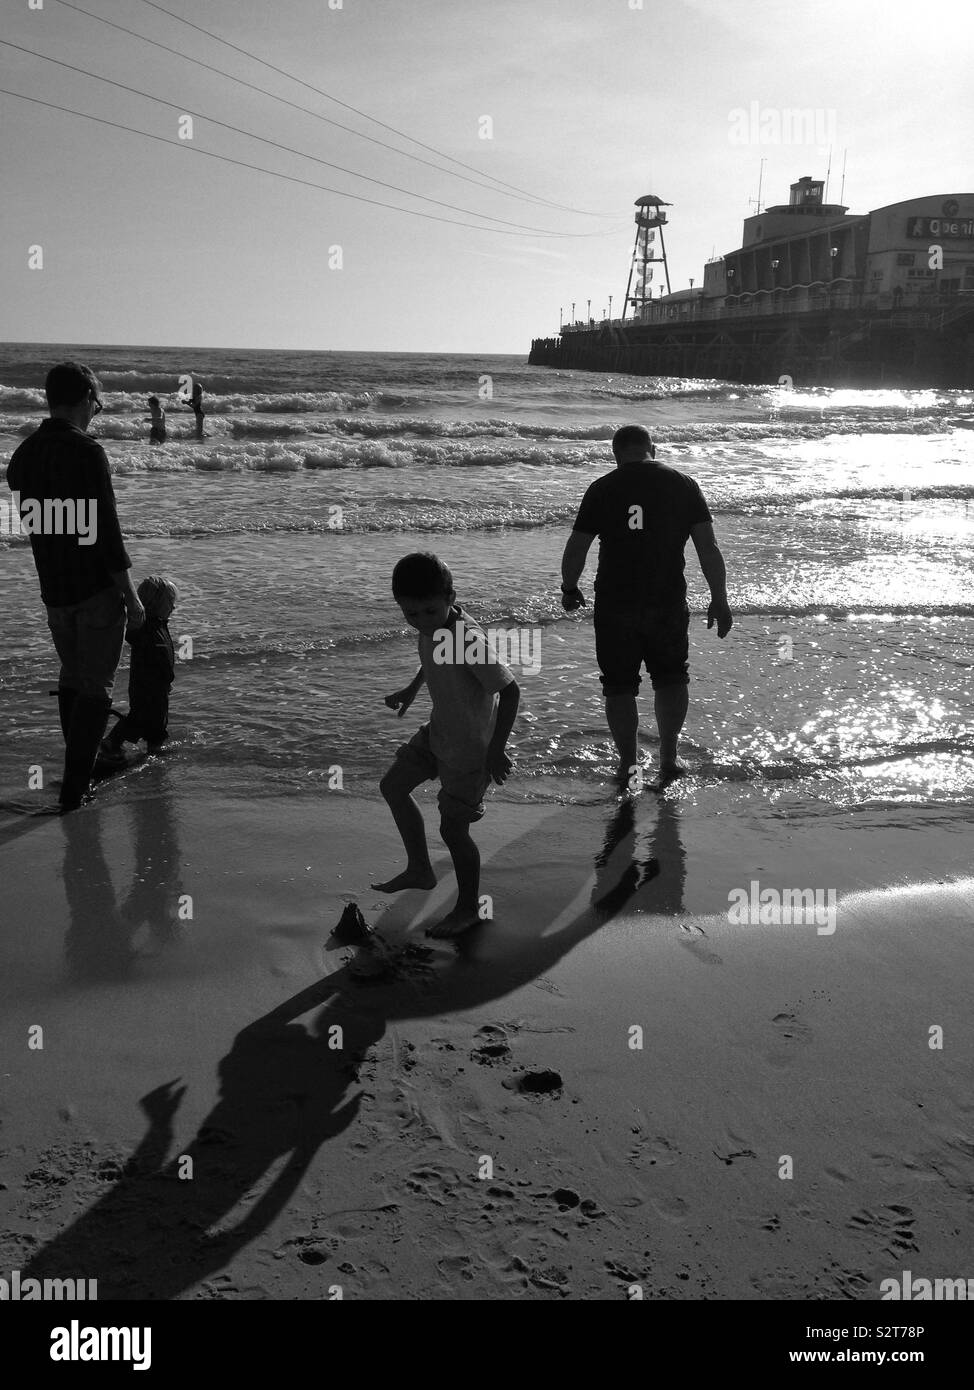 Silhouette of people on Bournemouth Sea front, Dorset Stock Photo